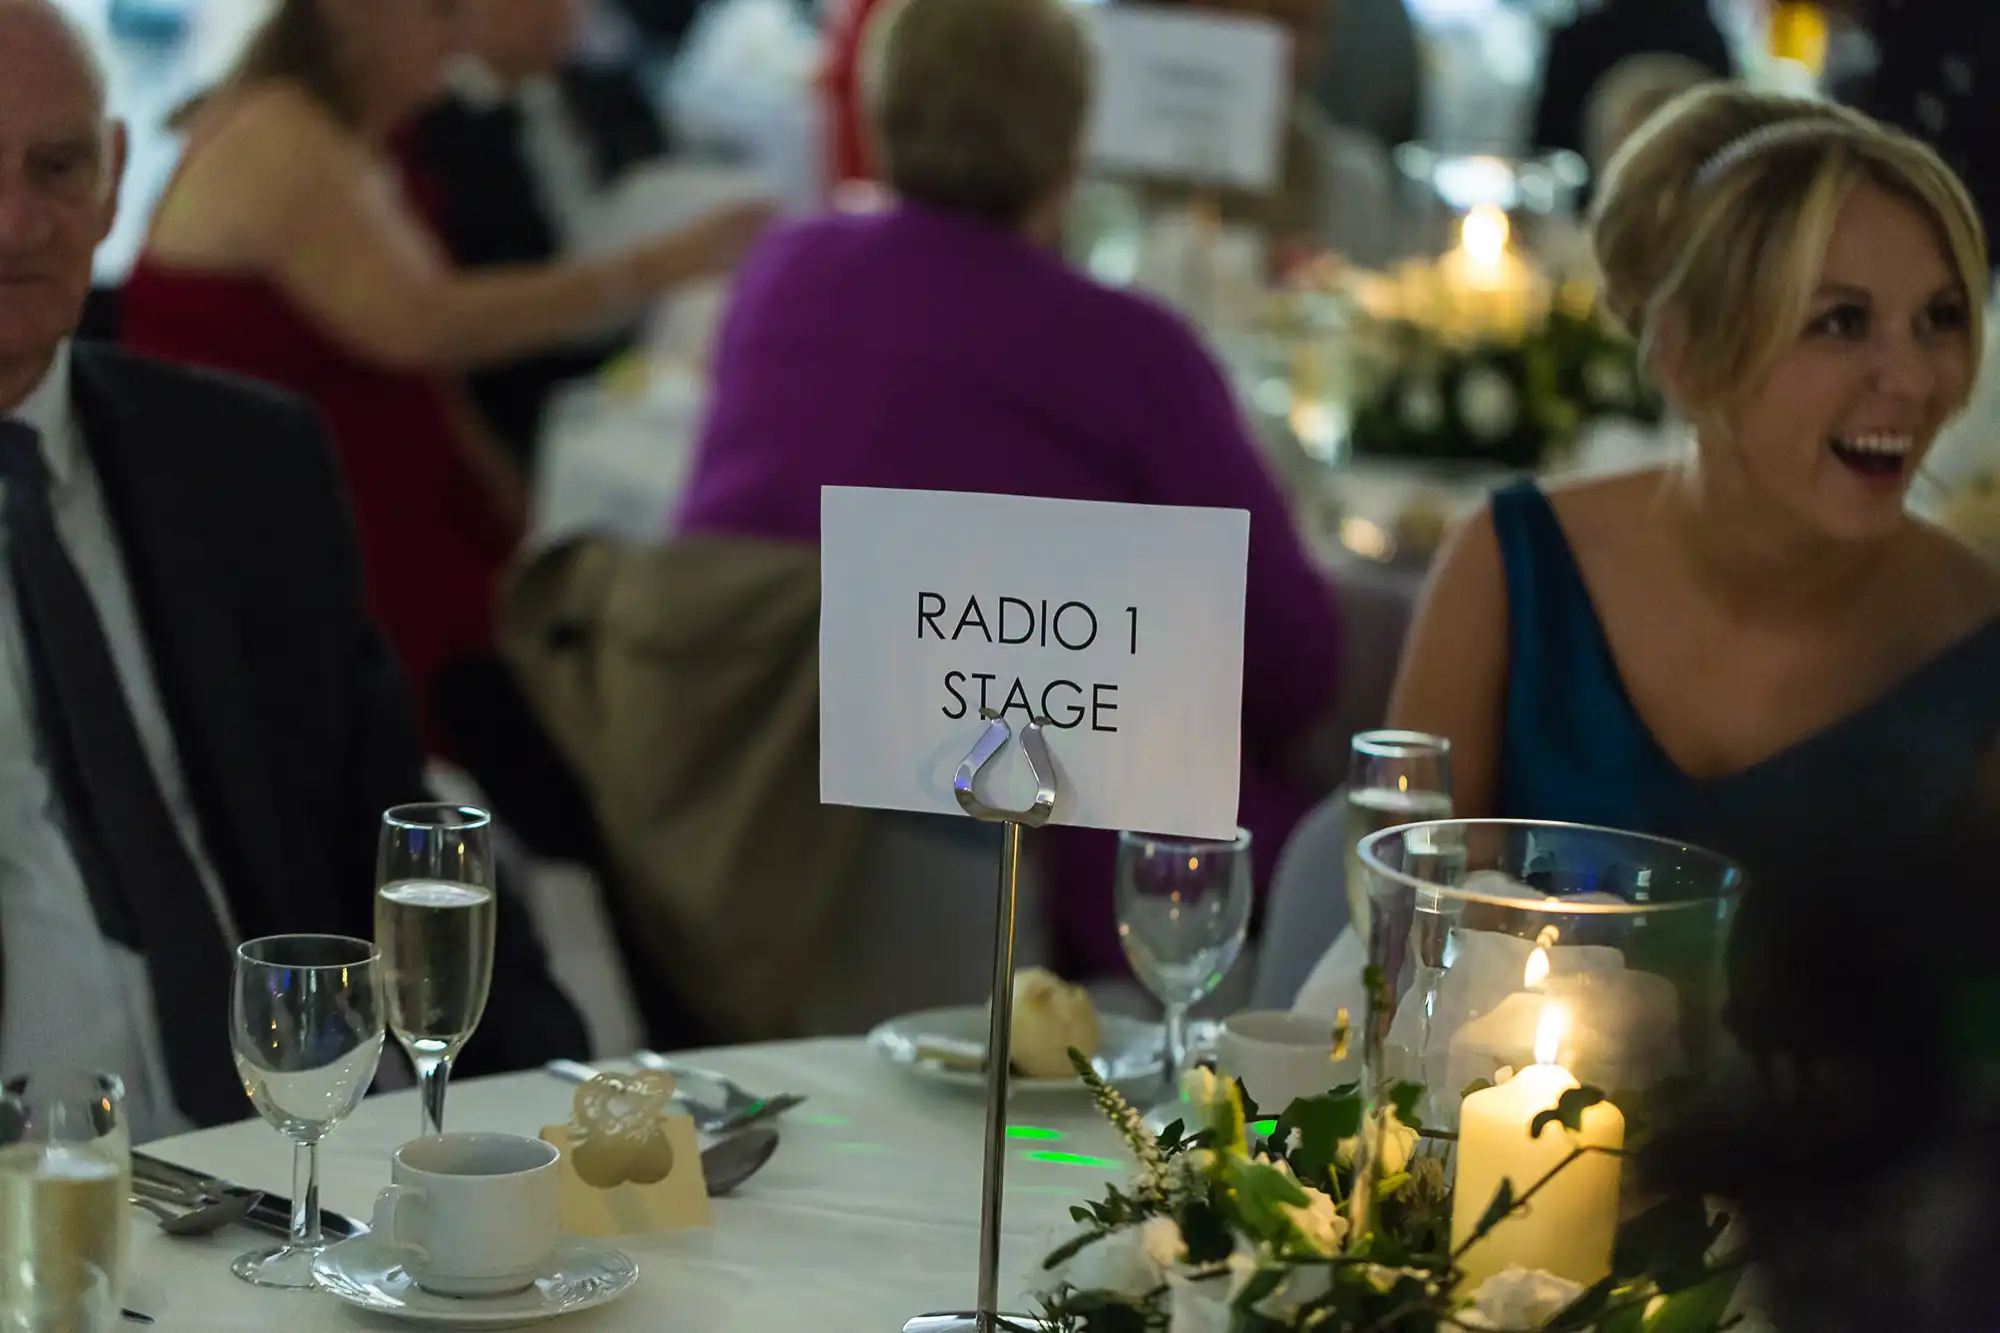 Table at a formal event with a sign reading "radio 1 stage," surrounded by guests and decorated with candles and a floral centerpiece.